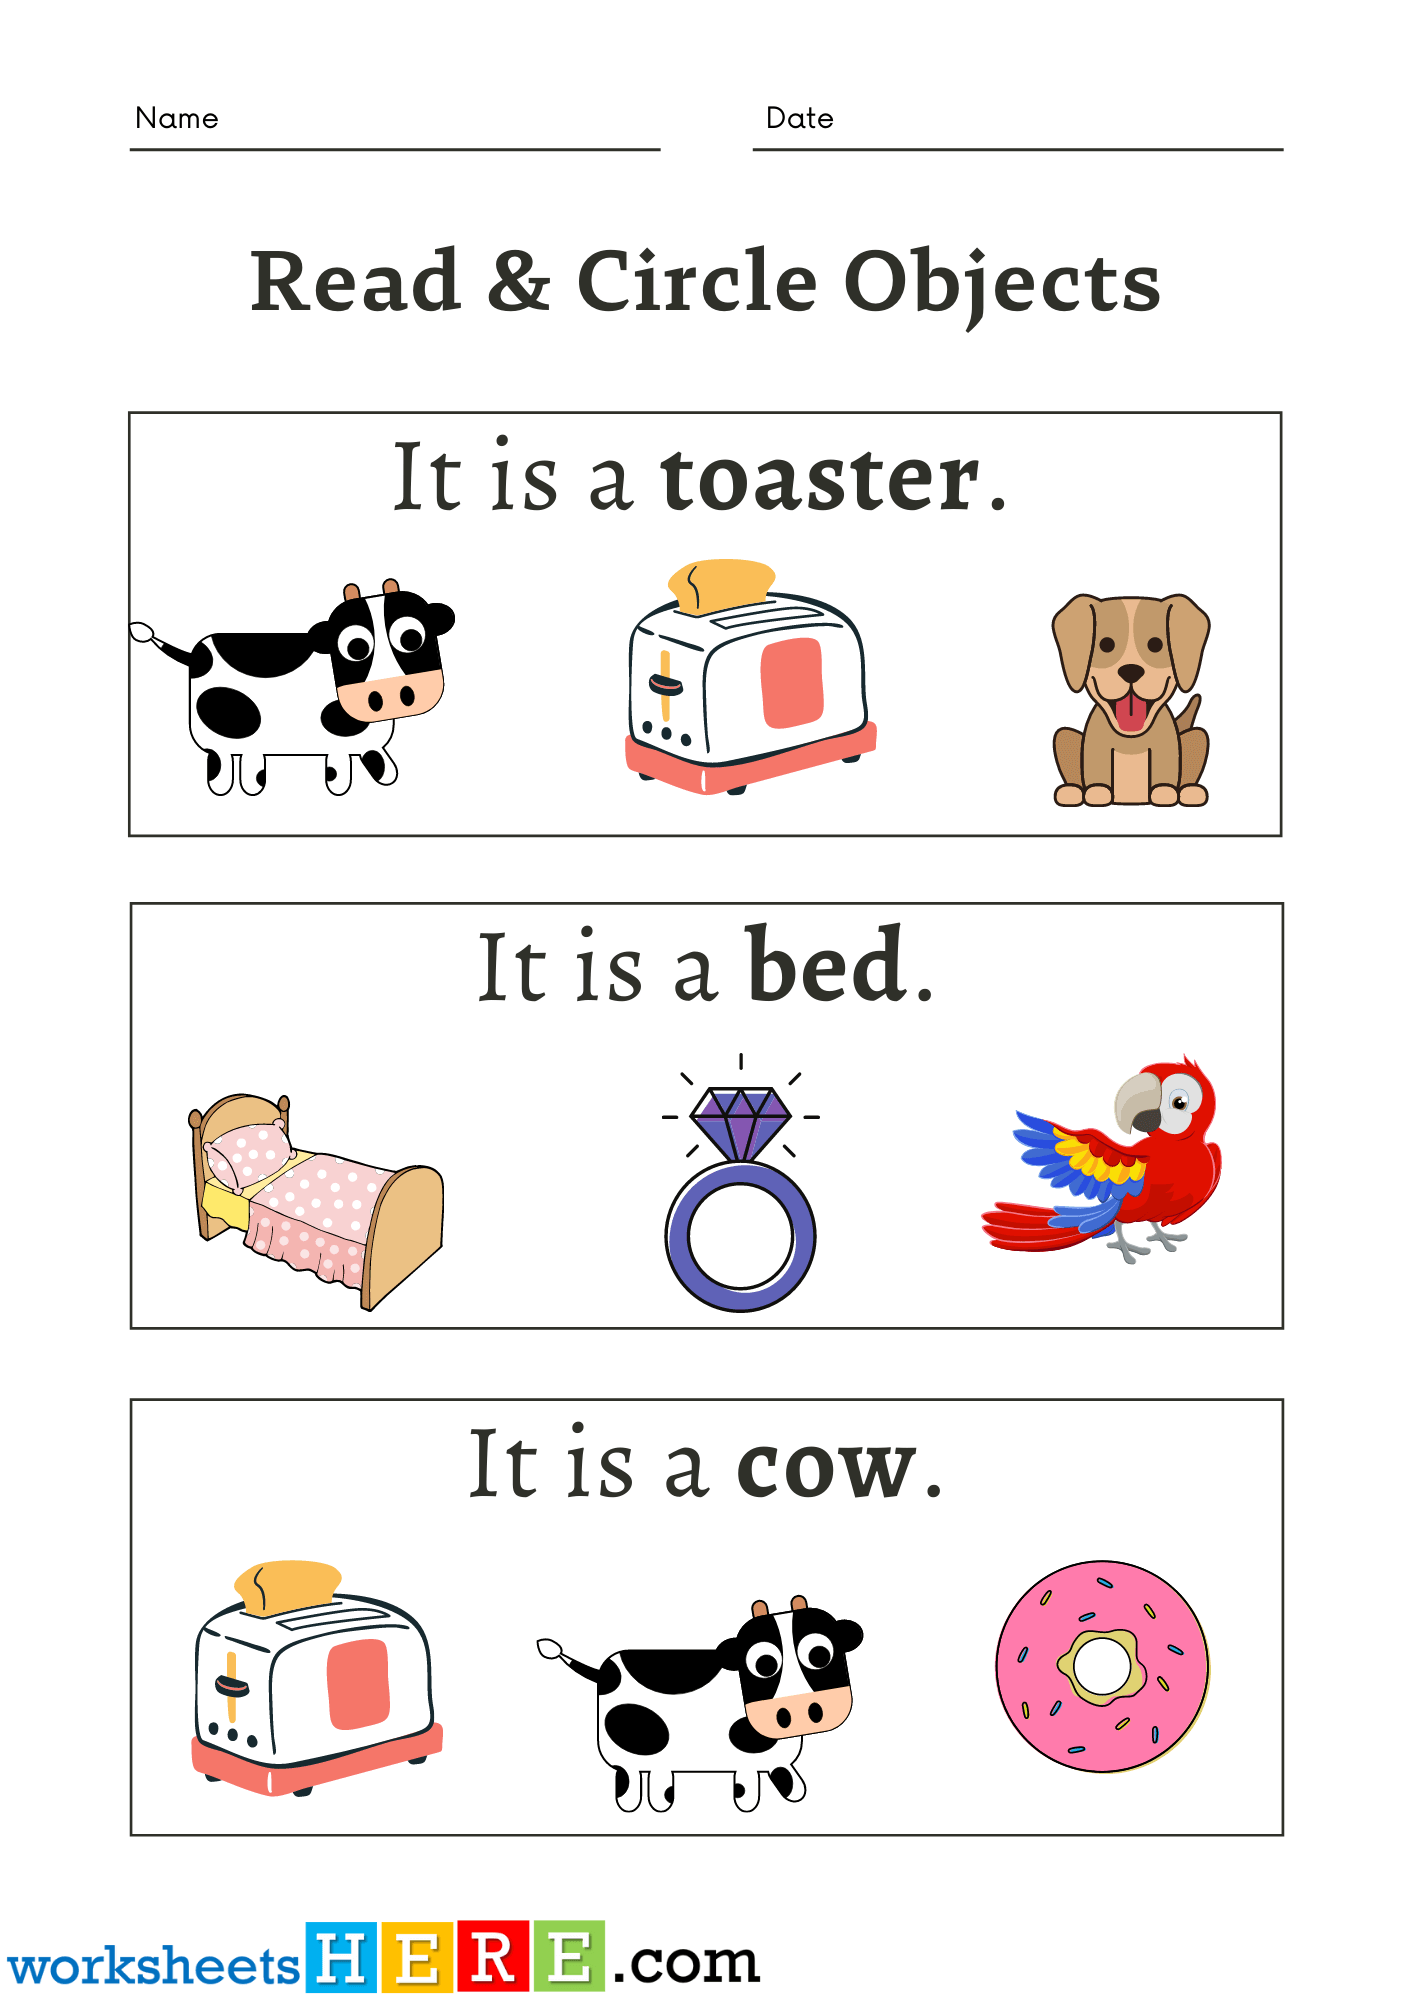 Read Sentences and Circle Toaster, Bed, Cow Activity Worksheets For Kids